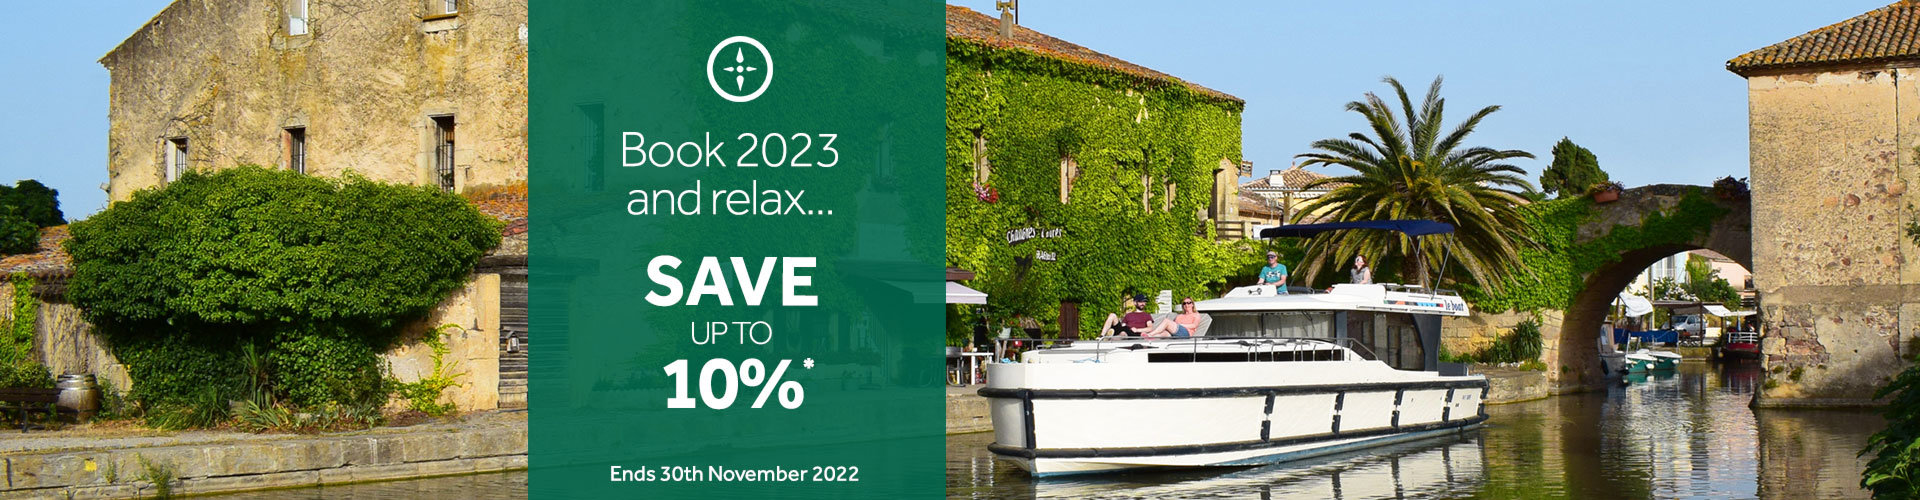 Emerald Star - Book for 2023 and save